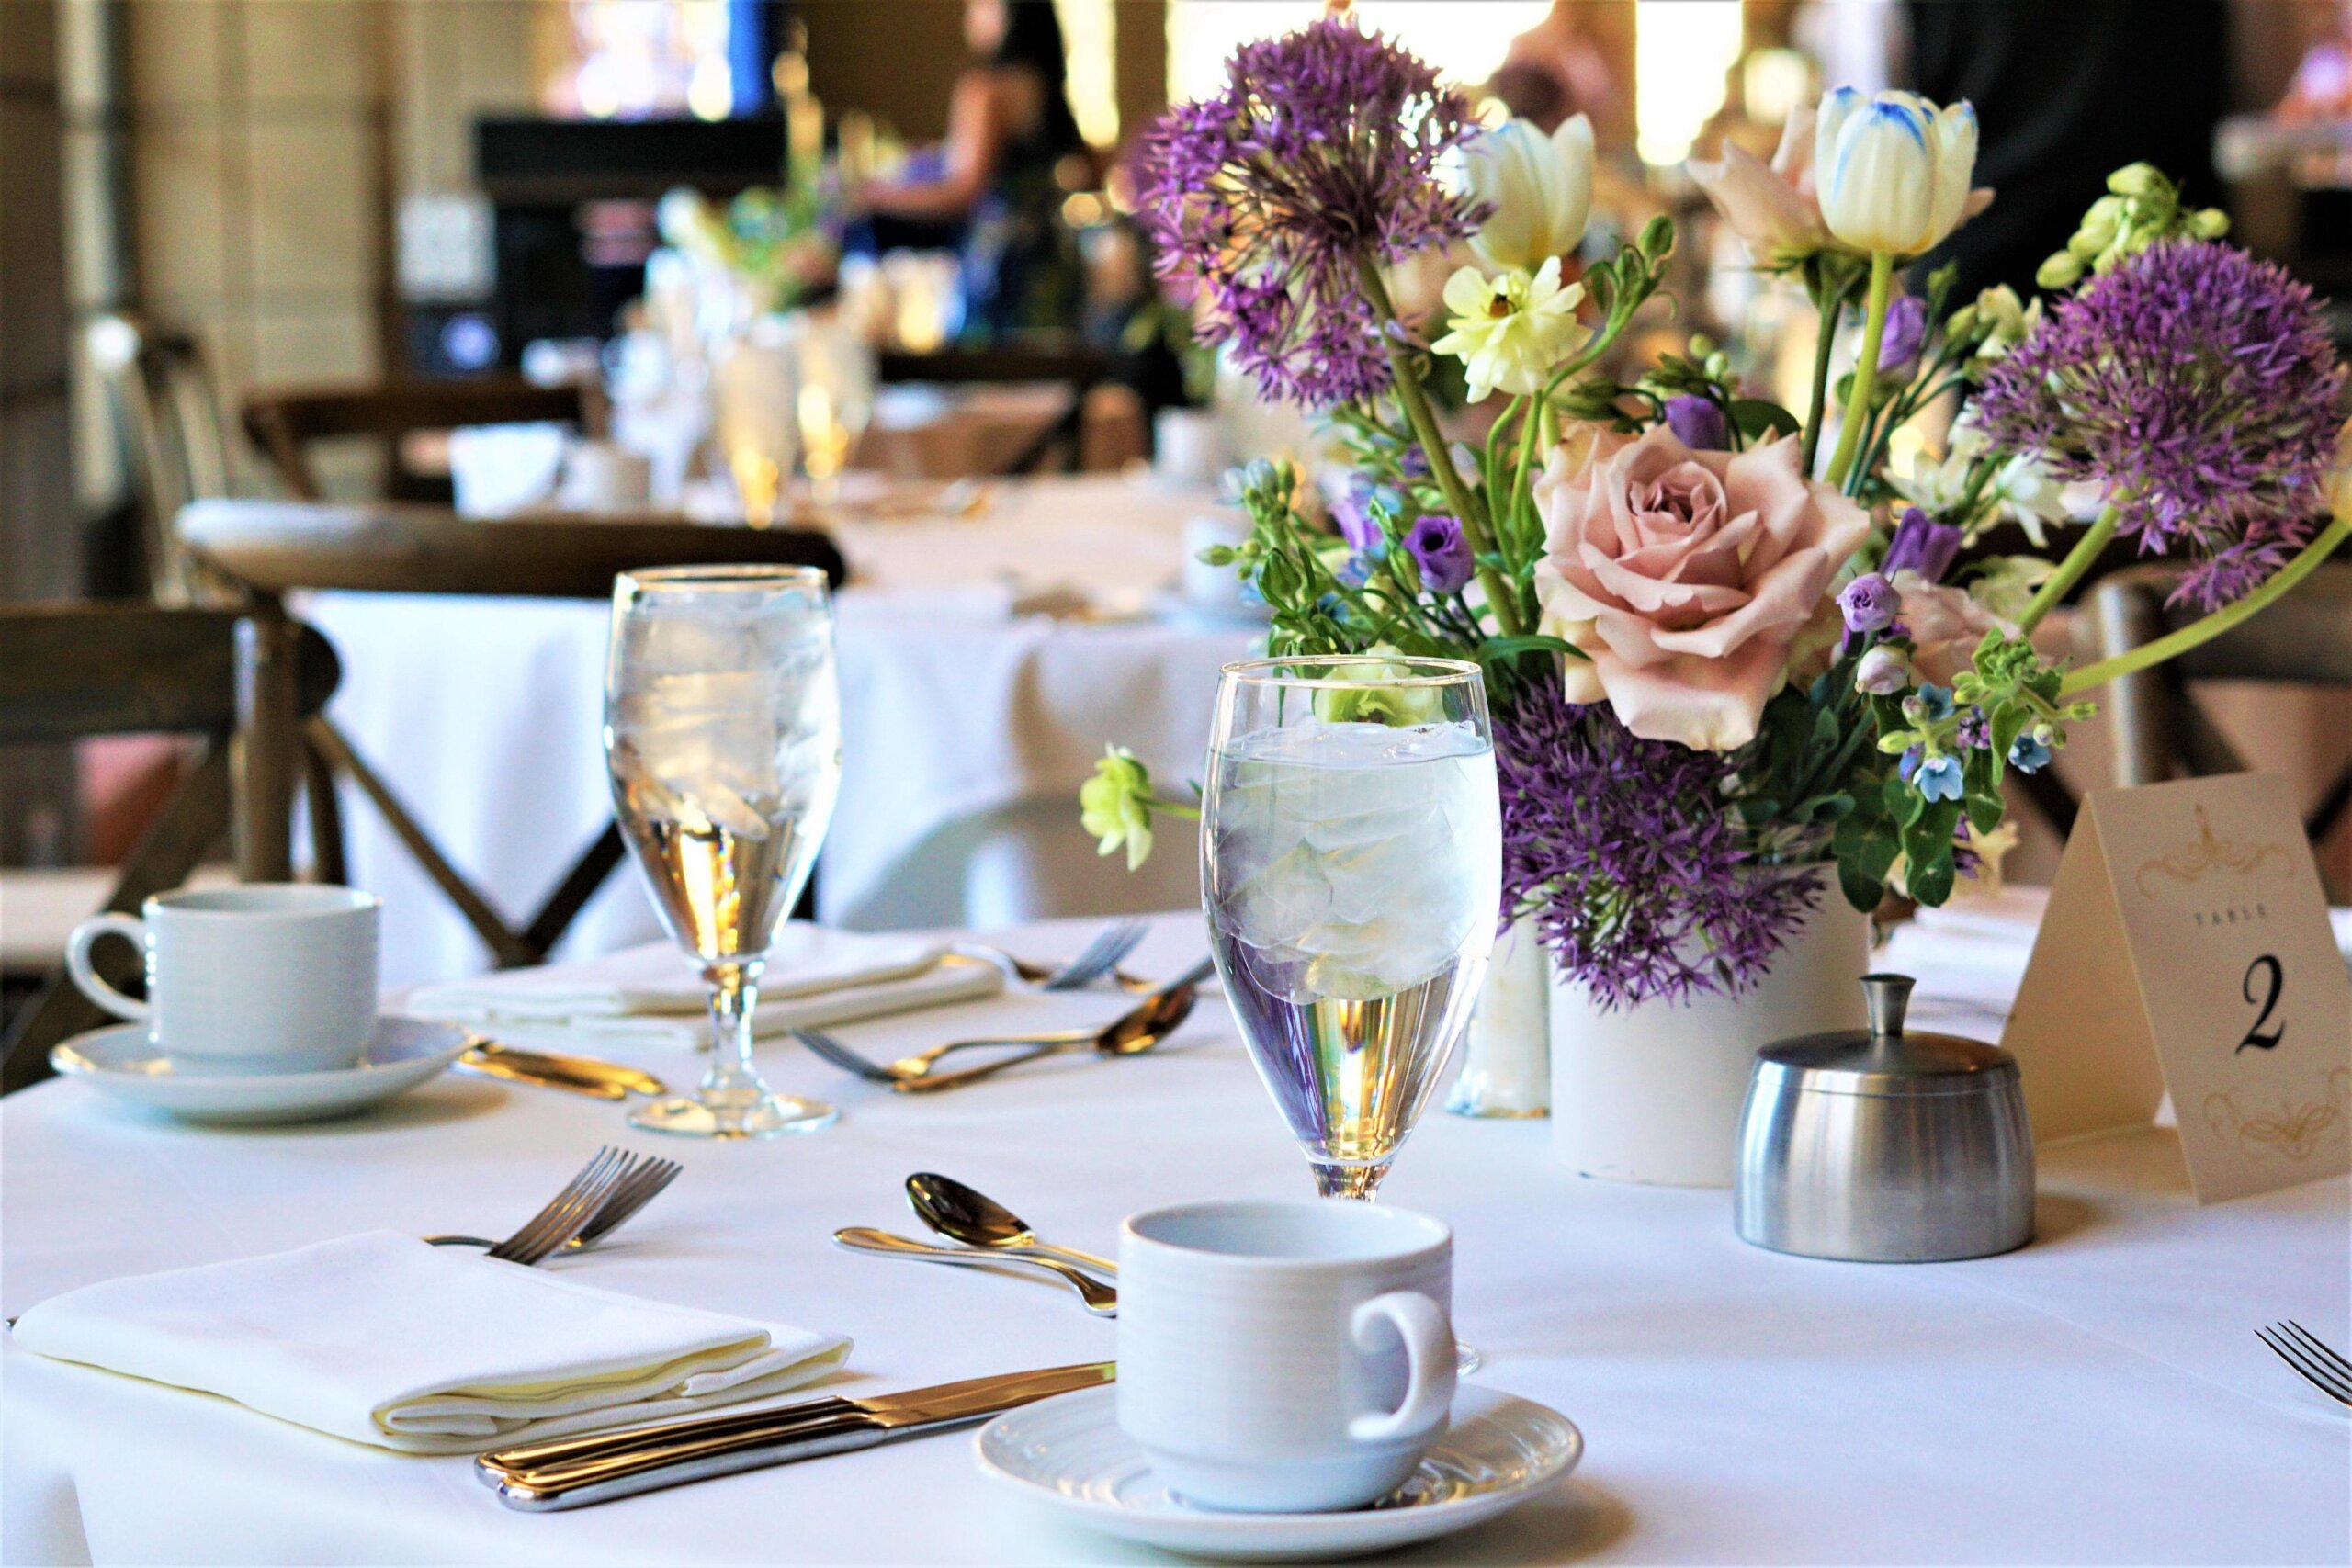 Cover Image for Dining room at The Gold Room. The tables are covered in a white tablecloth and have flowers on them.